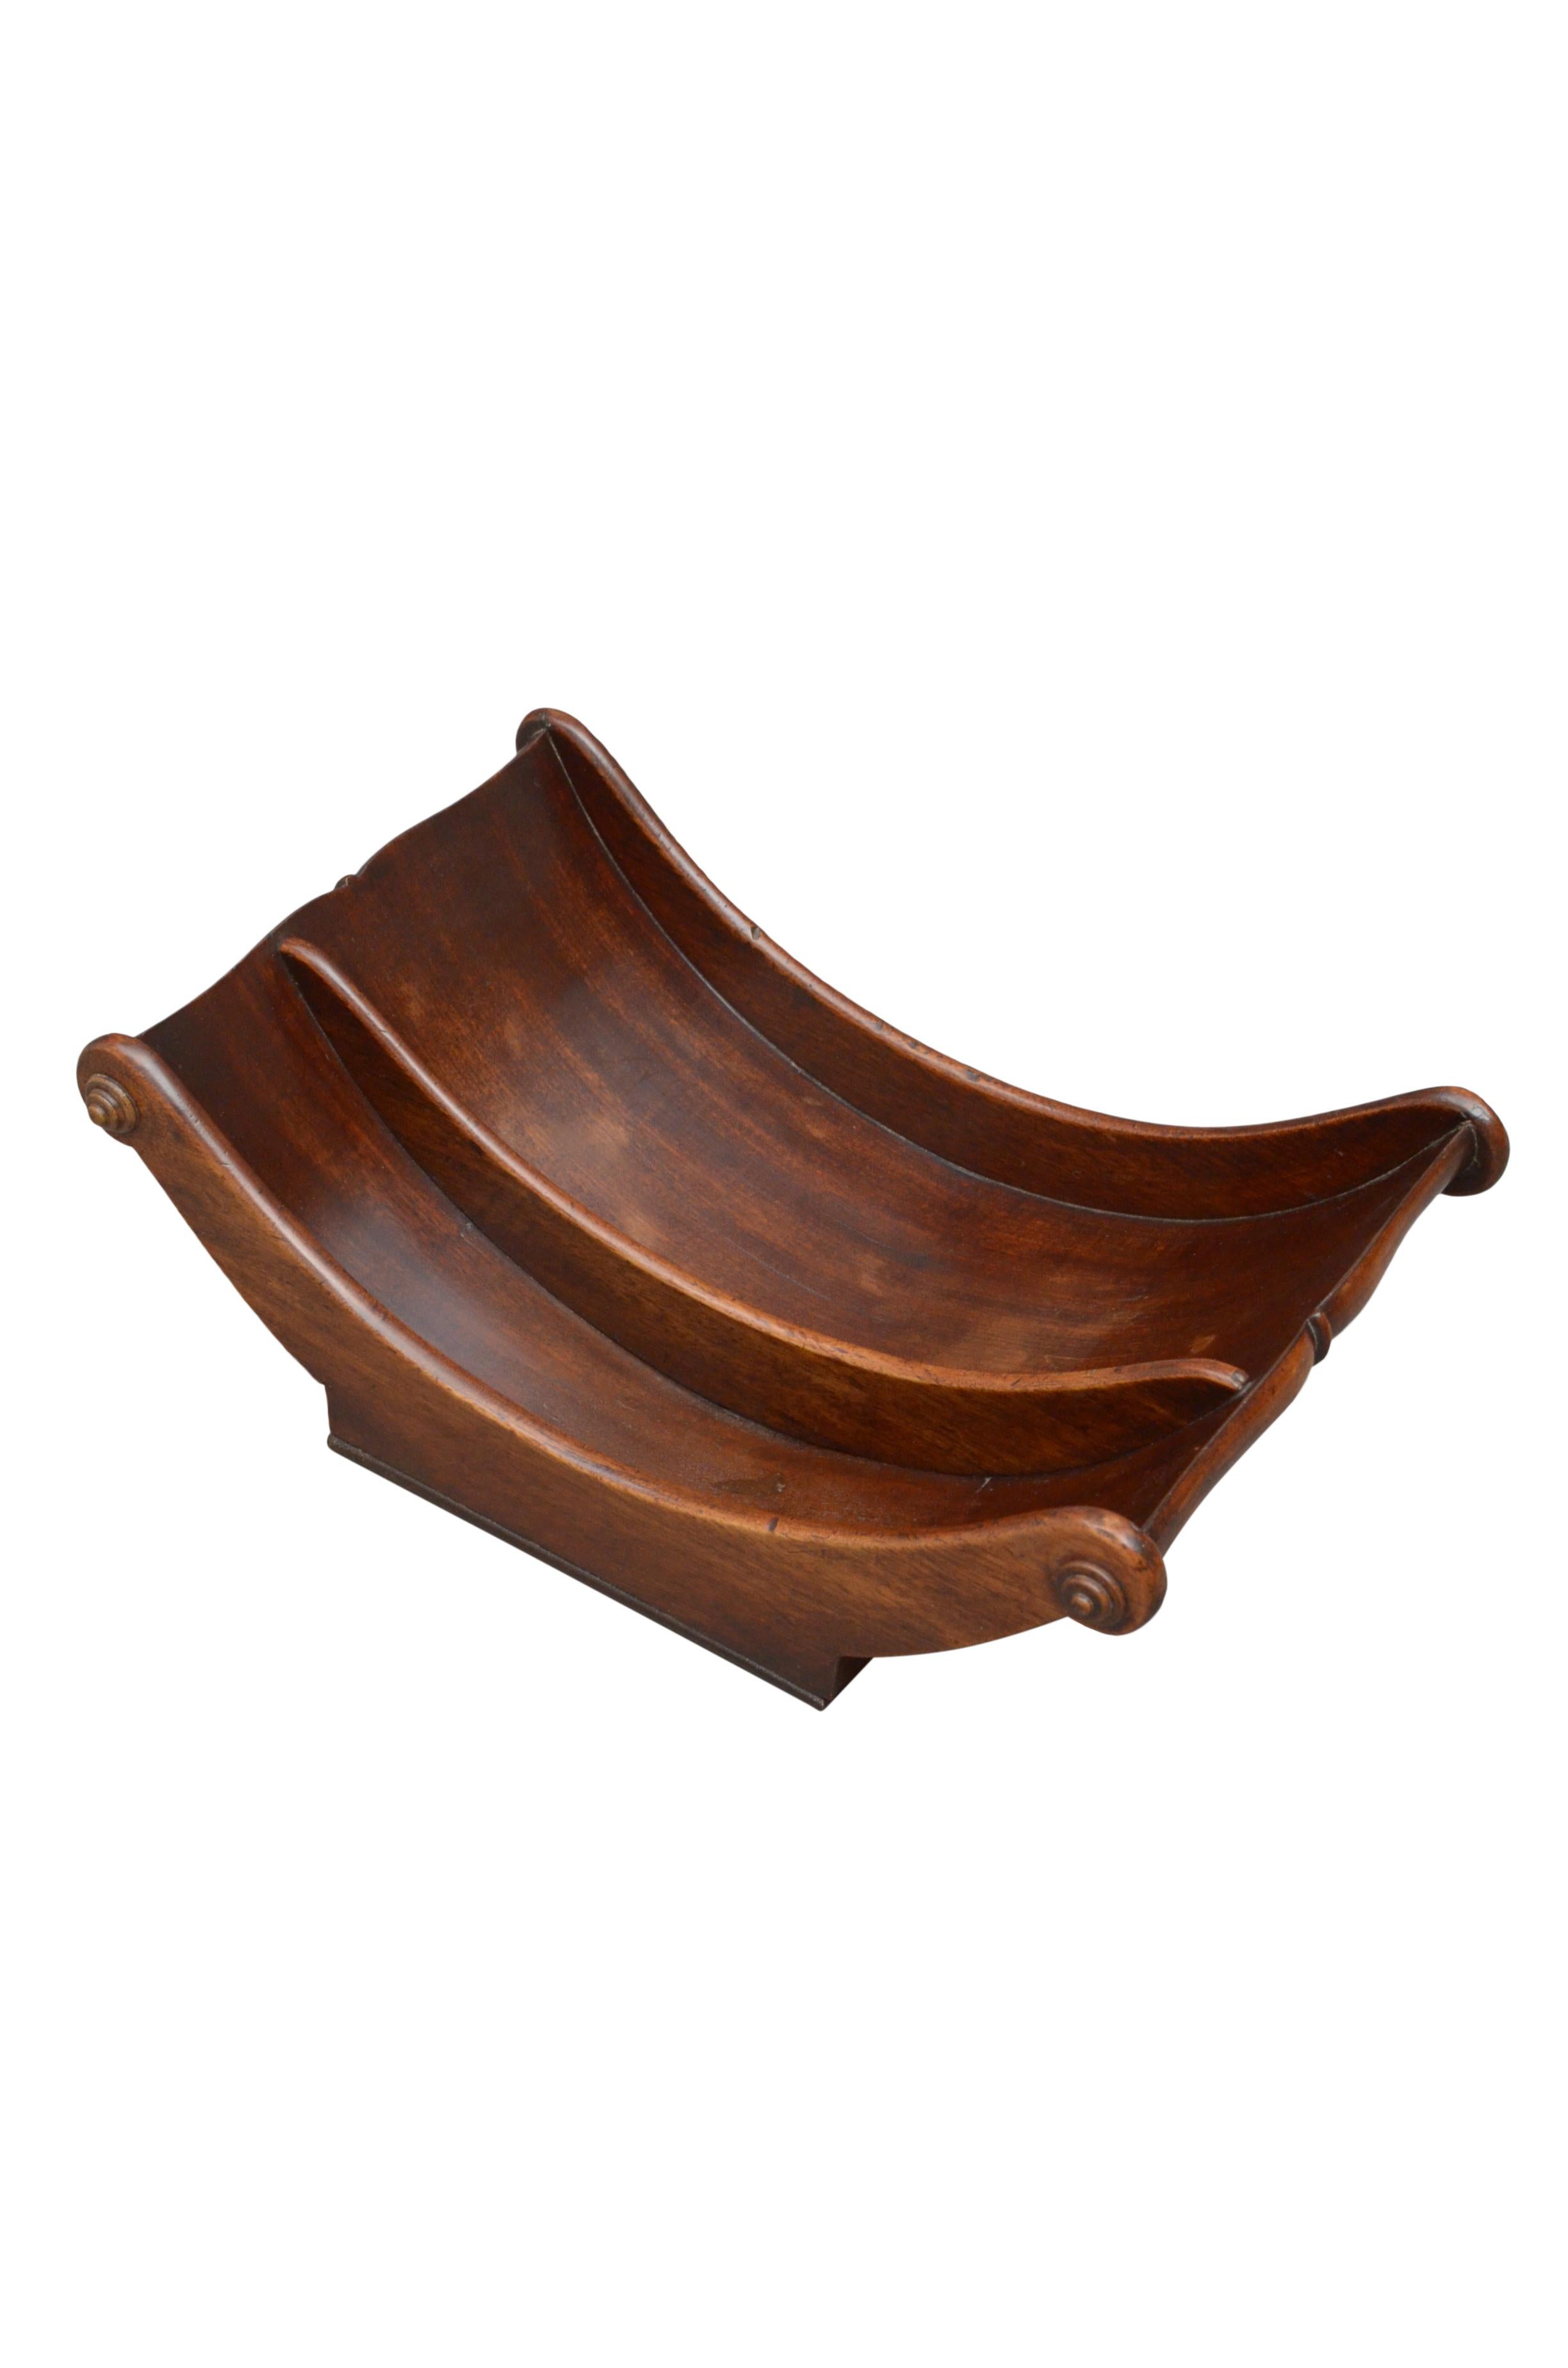 K0464 A fine quality George III, boat shaped mahogany cheese coaster with carved pateraes to sides and 2 compartments, all retains original finish and excellent original patina. All in wonderful condition throughout - ready to place at home.